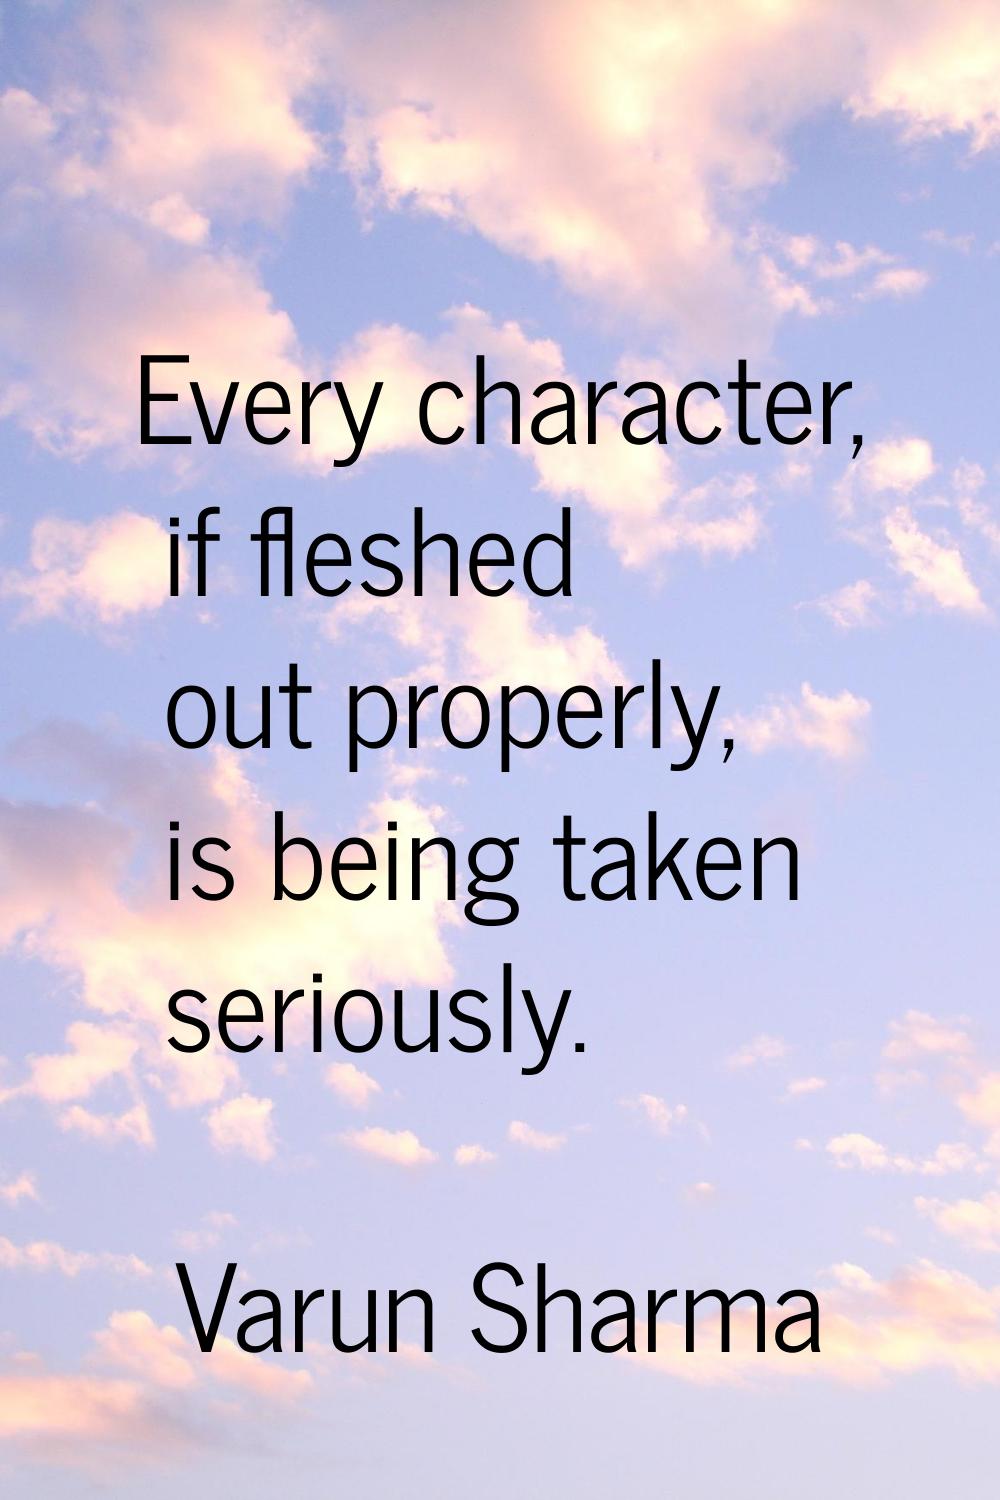 Every character, if fleshed out properly, is being taken seriously.